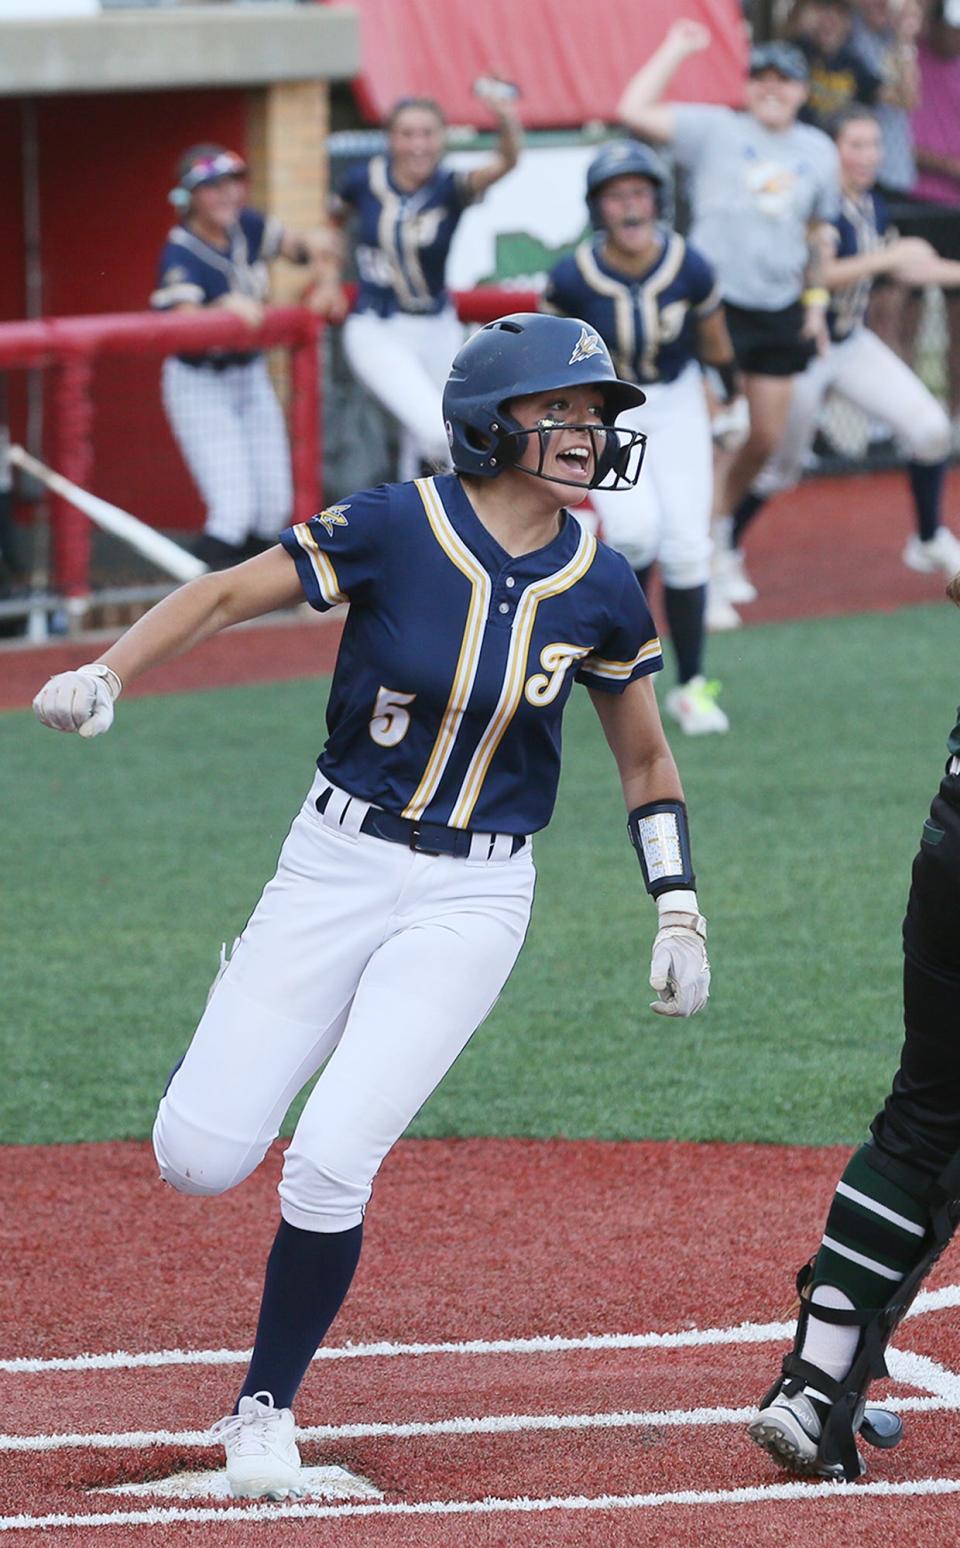 Tallmadge's Leila Staszak reacts as she scores the game winning run on a single in the seventh inning against Greenville in the Div. II state semifinal softball at Firestone Stadium in Akron.